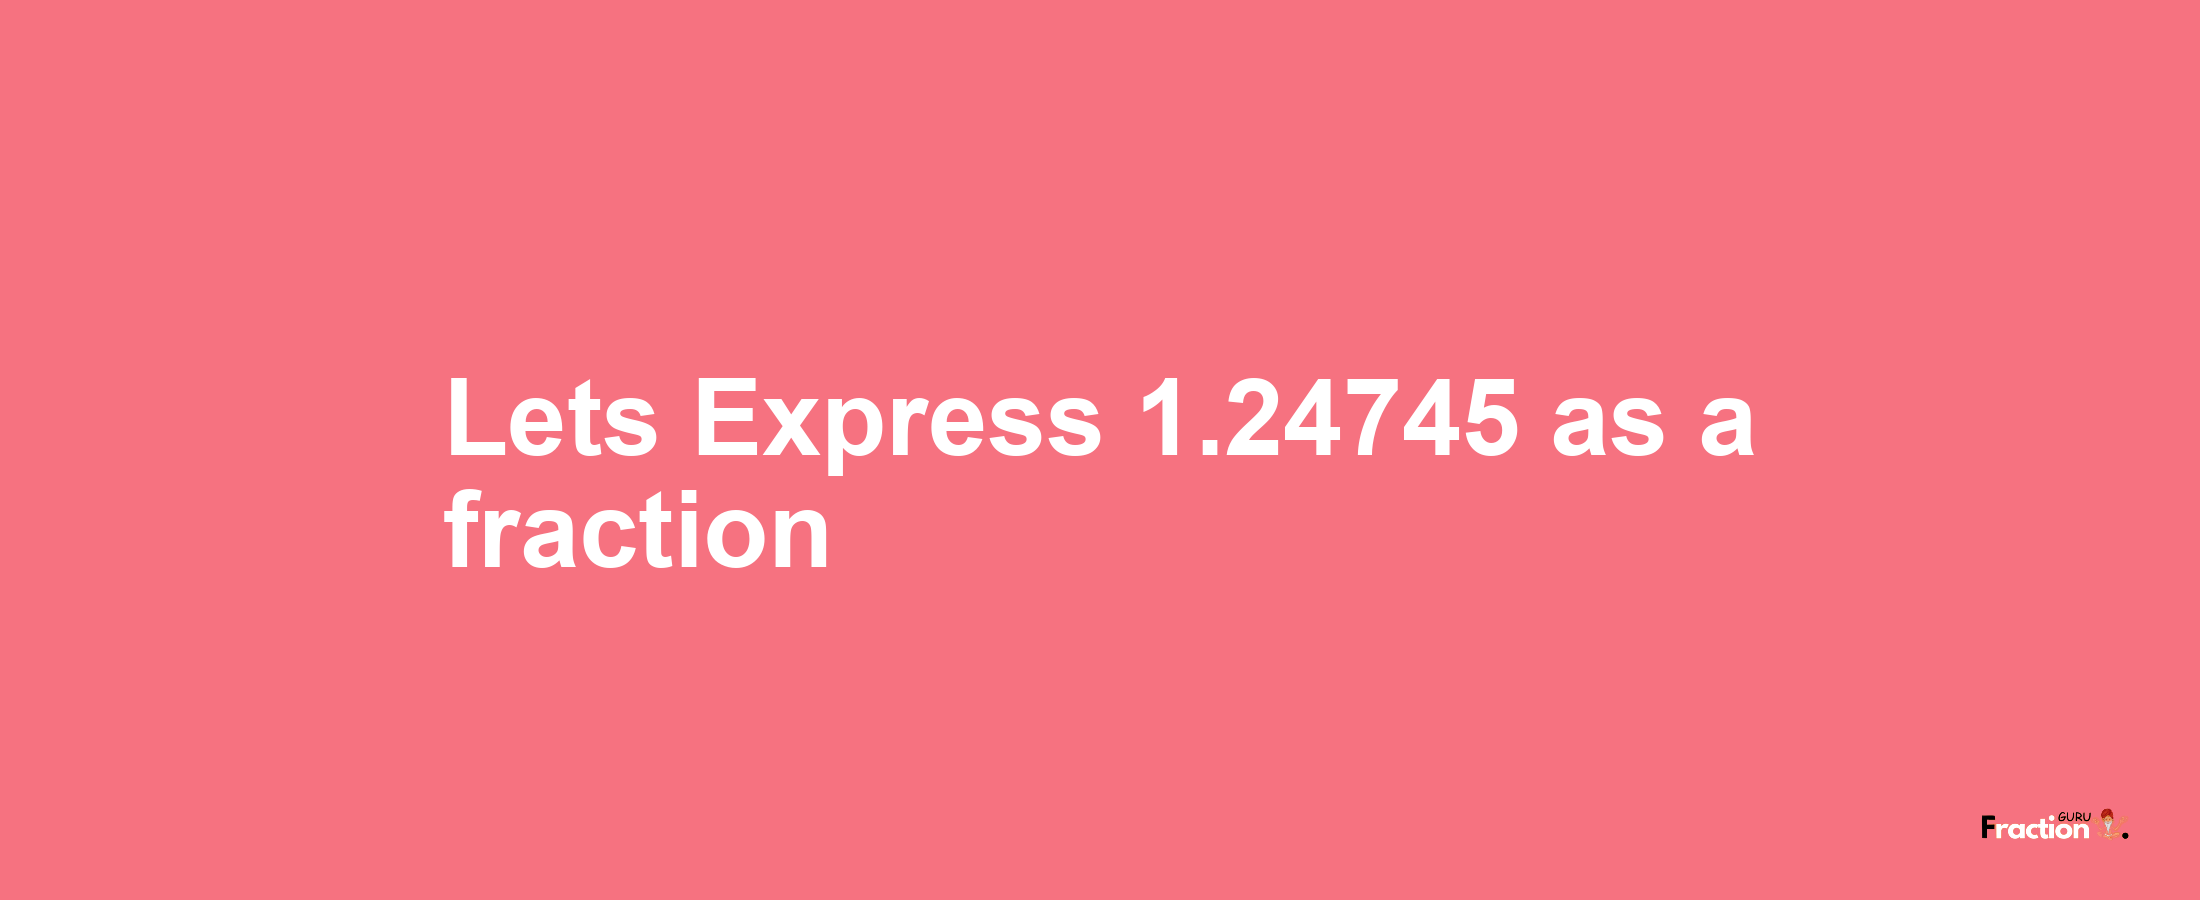 Lets Express 1.24745 as afraction